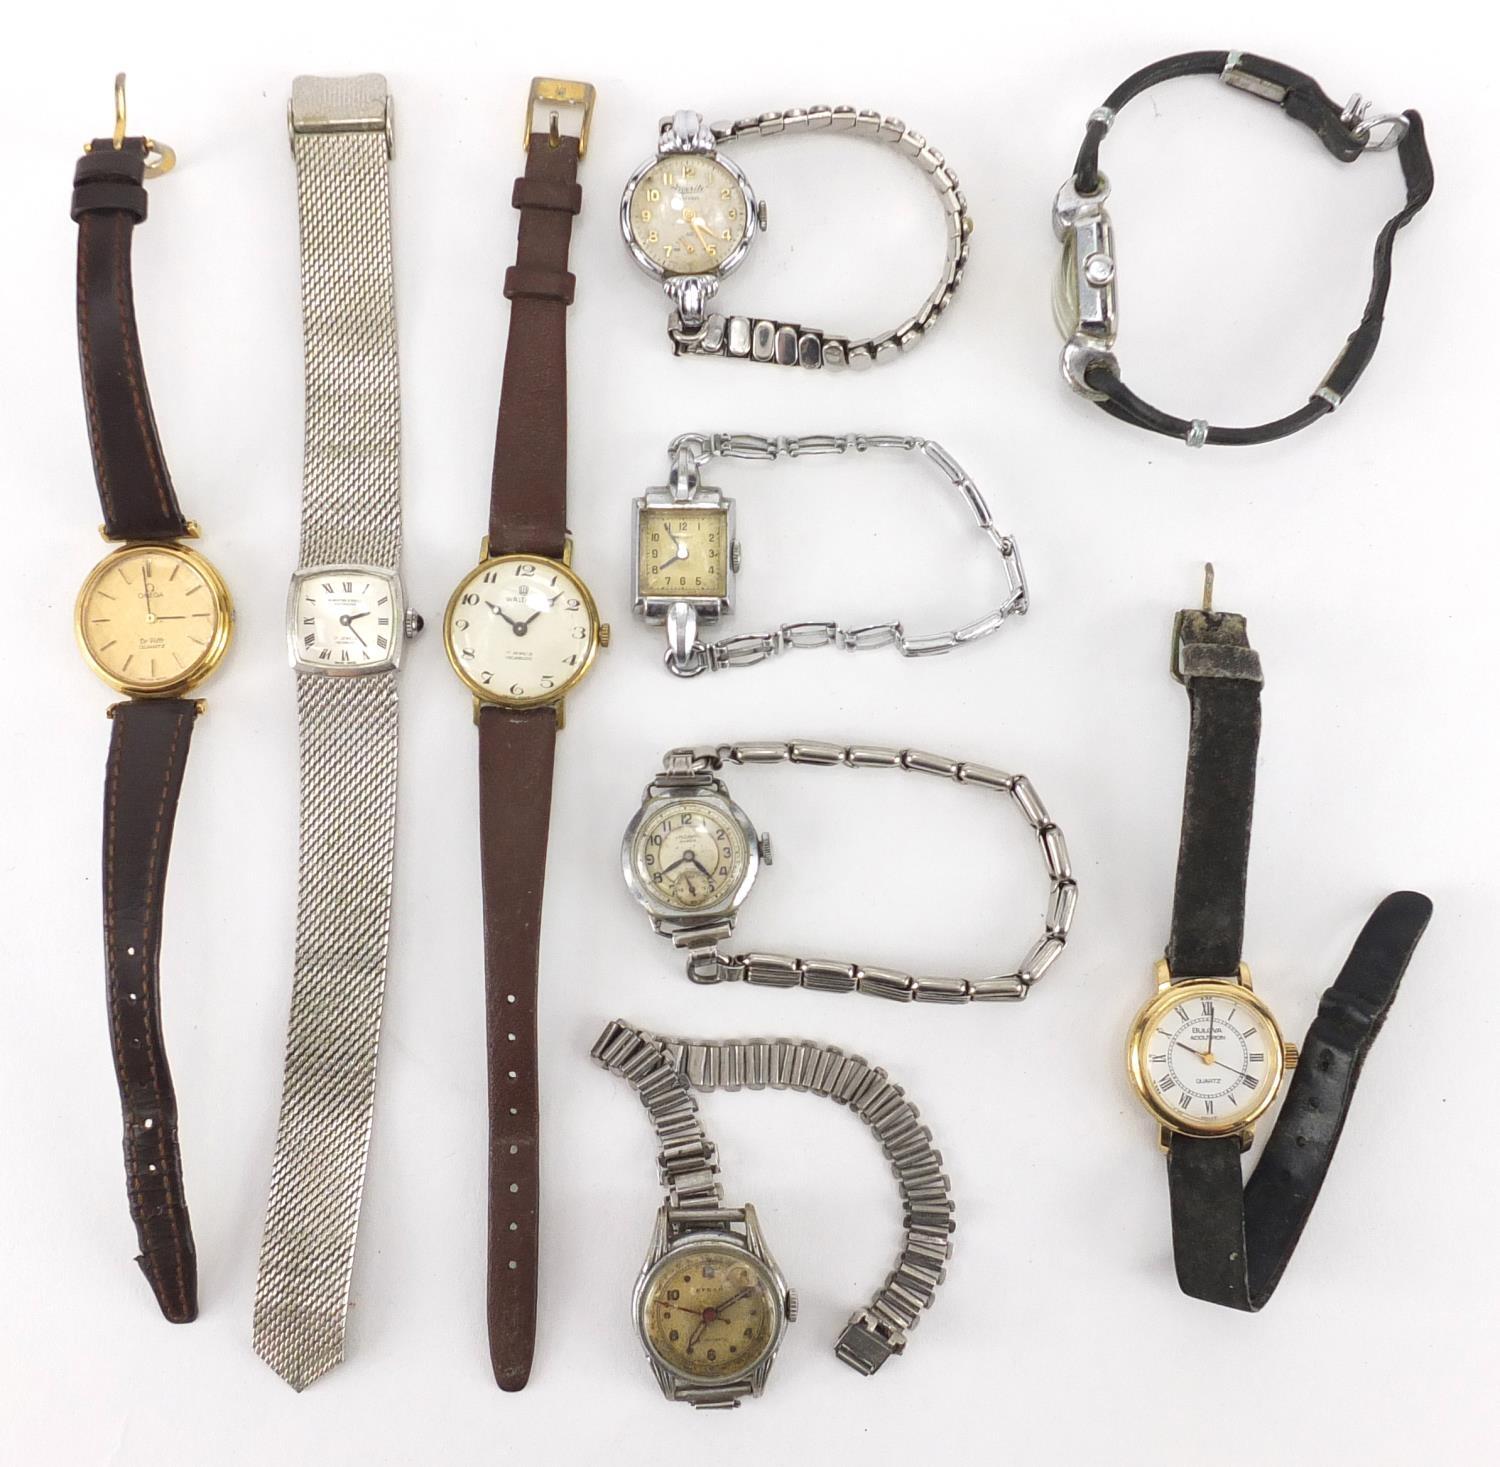 Vintage and later ladies wristwatches including Omega, Bulova, Waltham Everite and Waverly : For